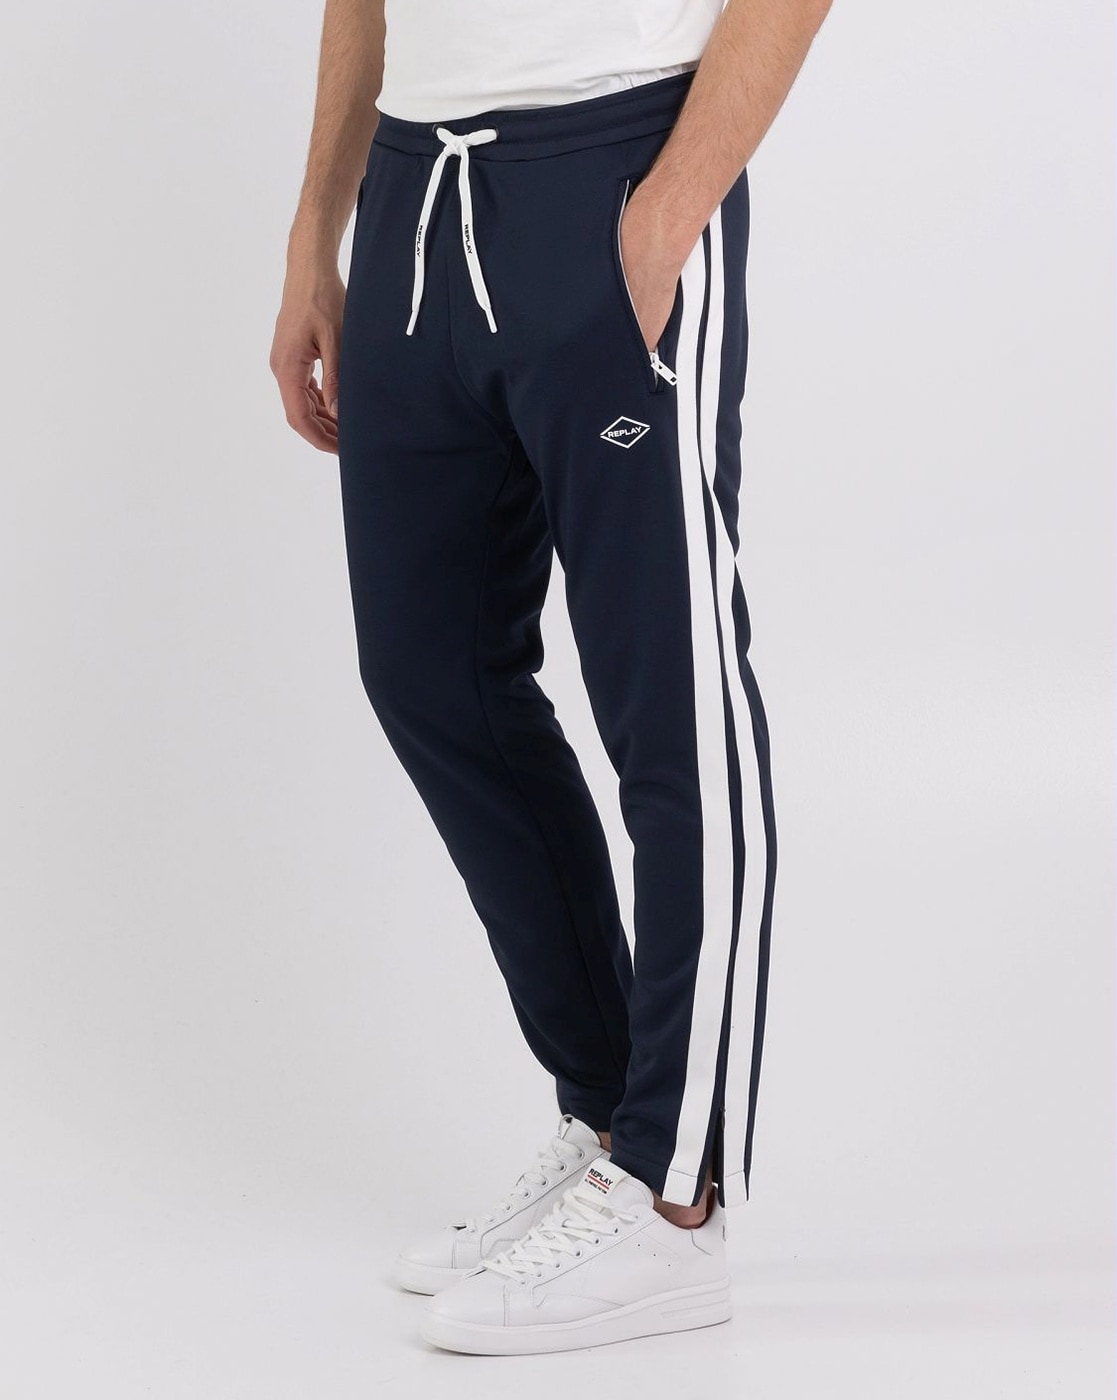 Buy Navy blue Track Pants for Women by Xoul Online | Ajio.com